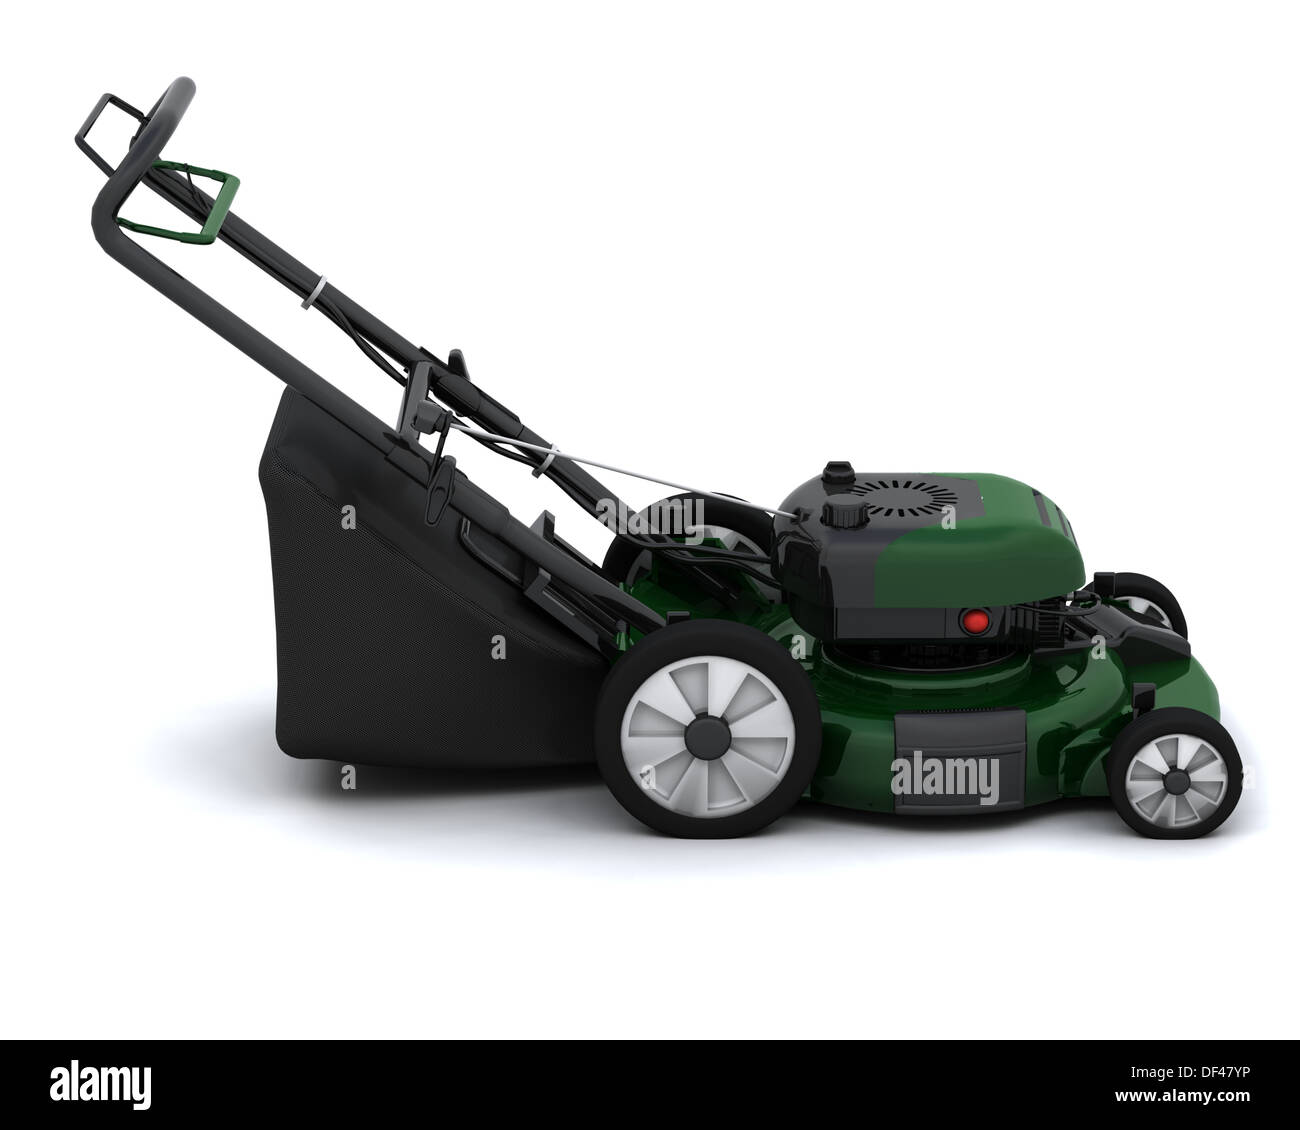 3D render of a lawn mower Stock Photo